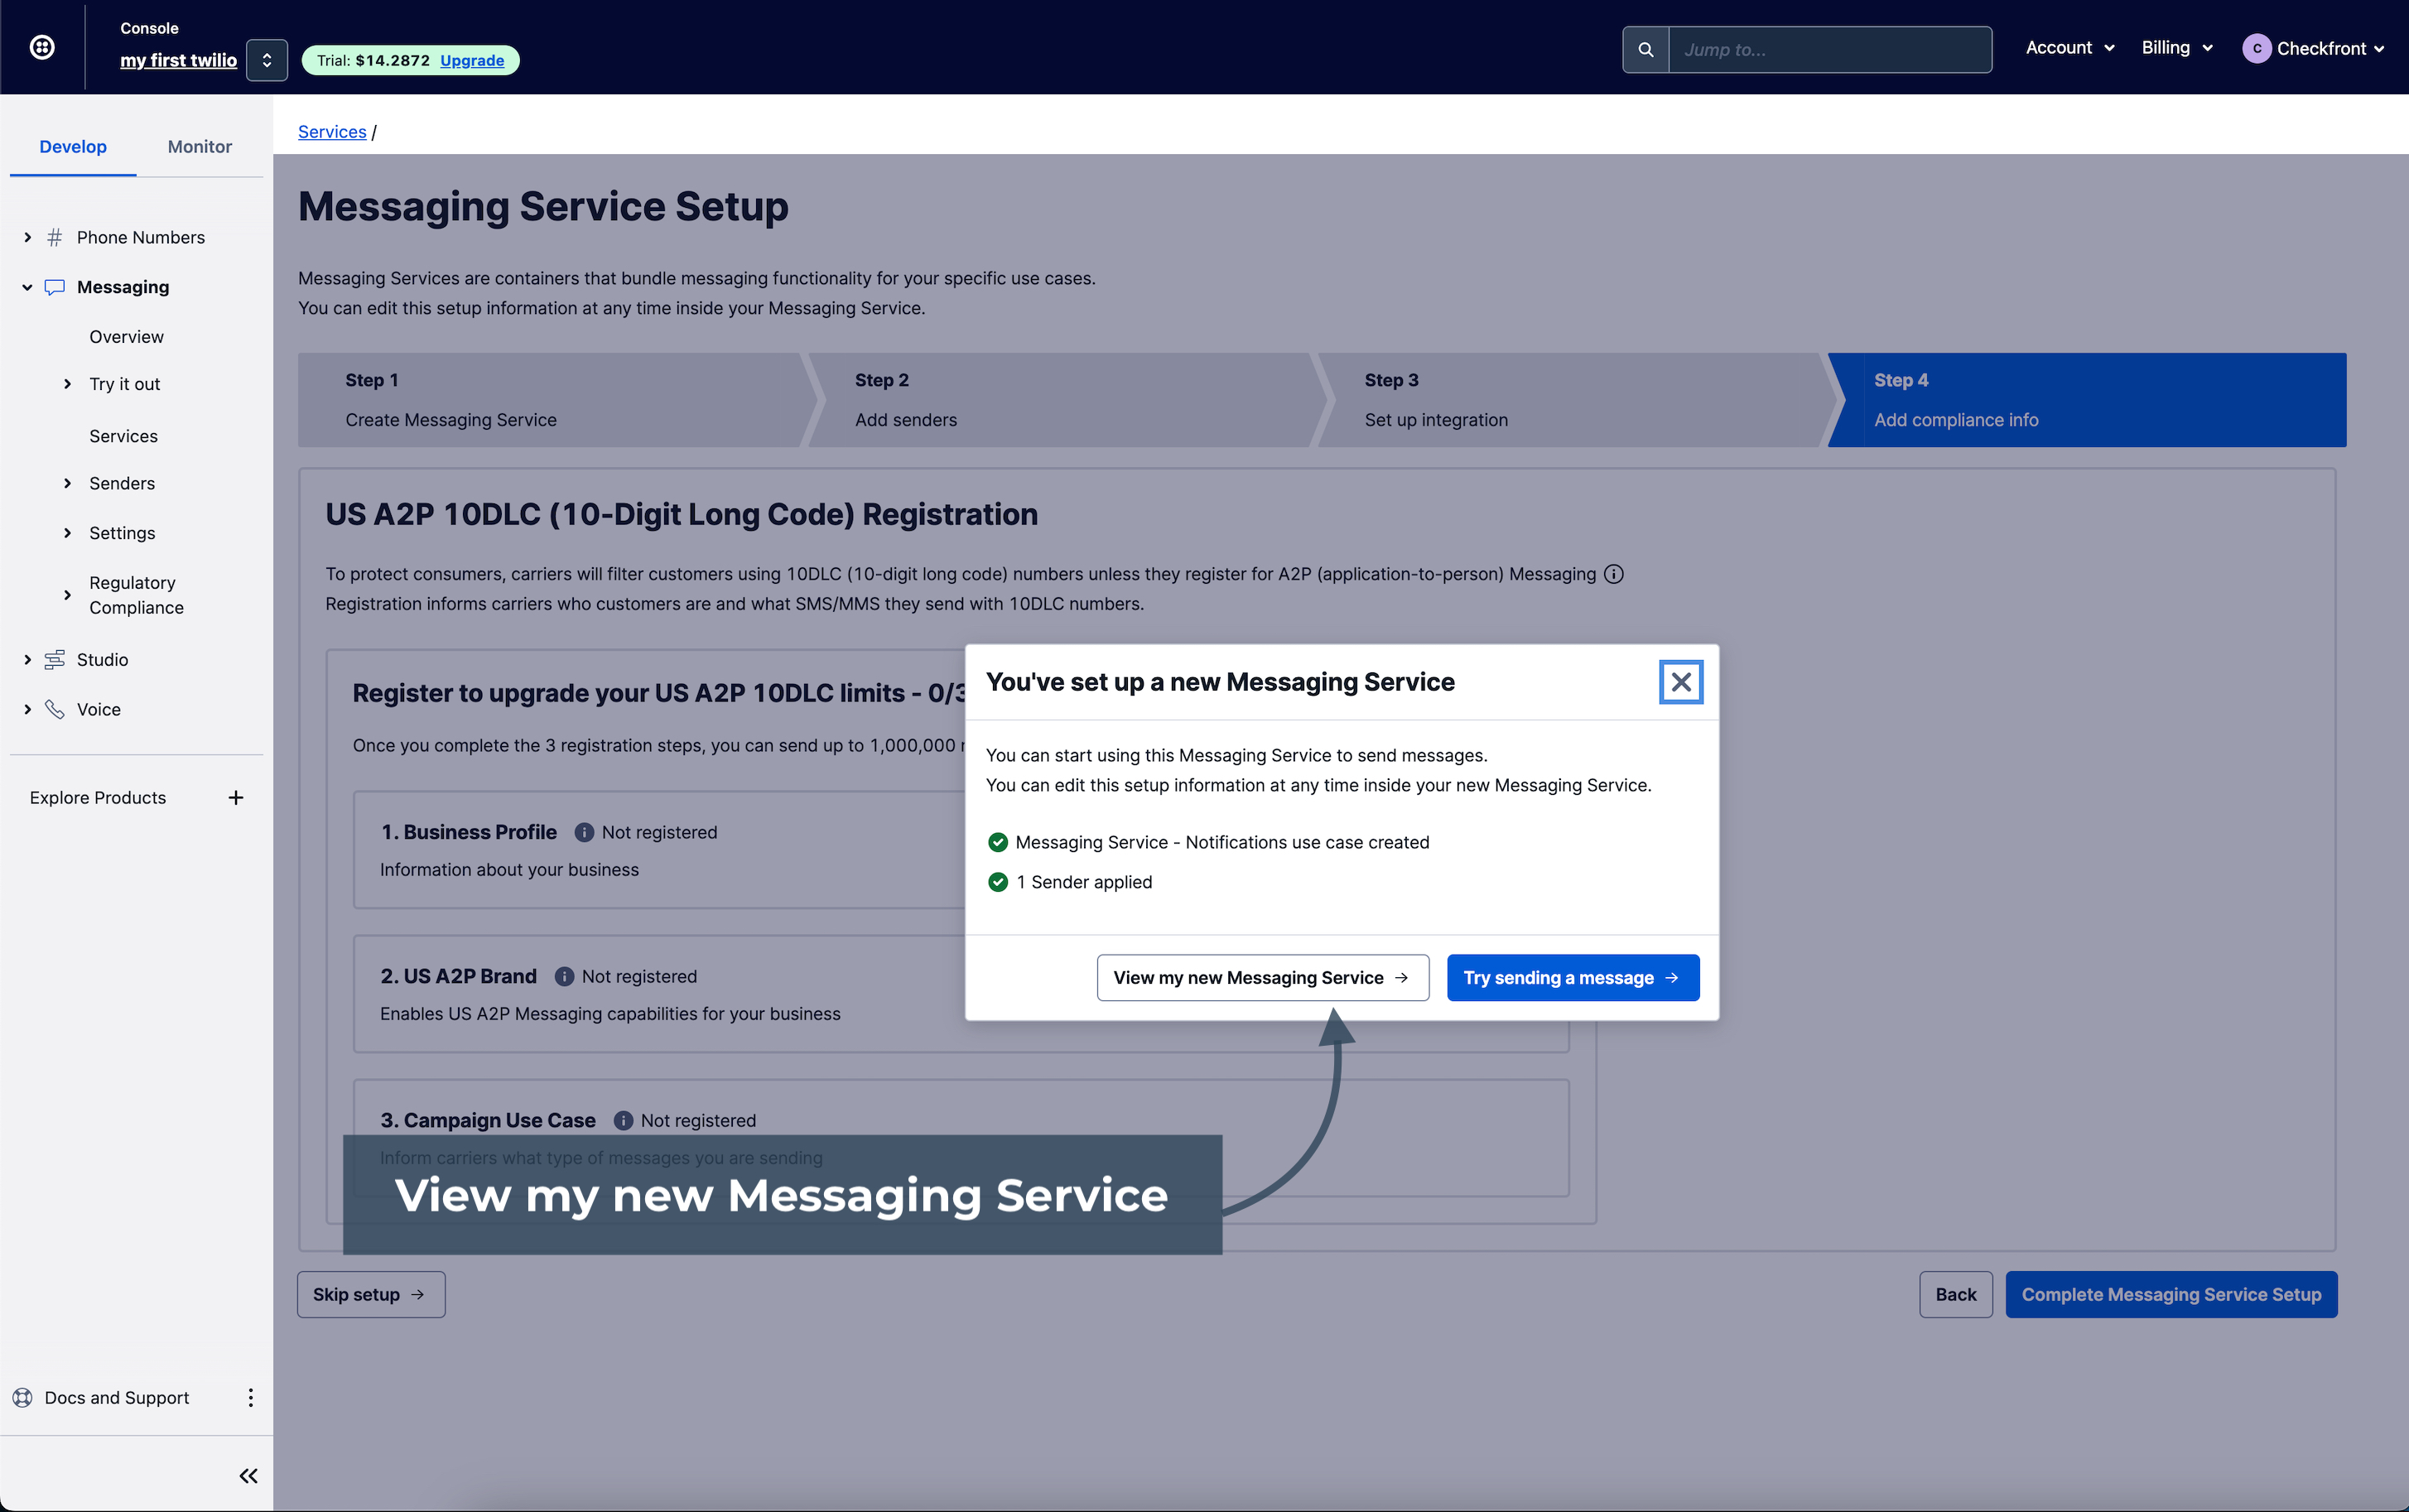 View Messaging Service